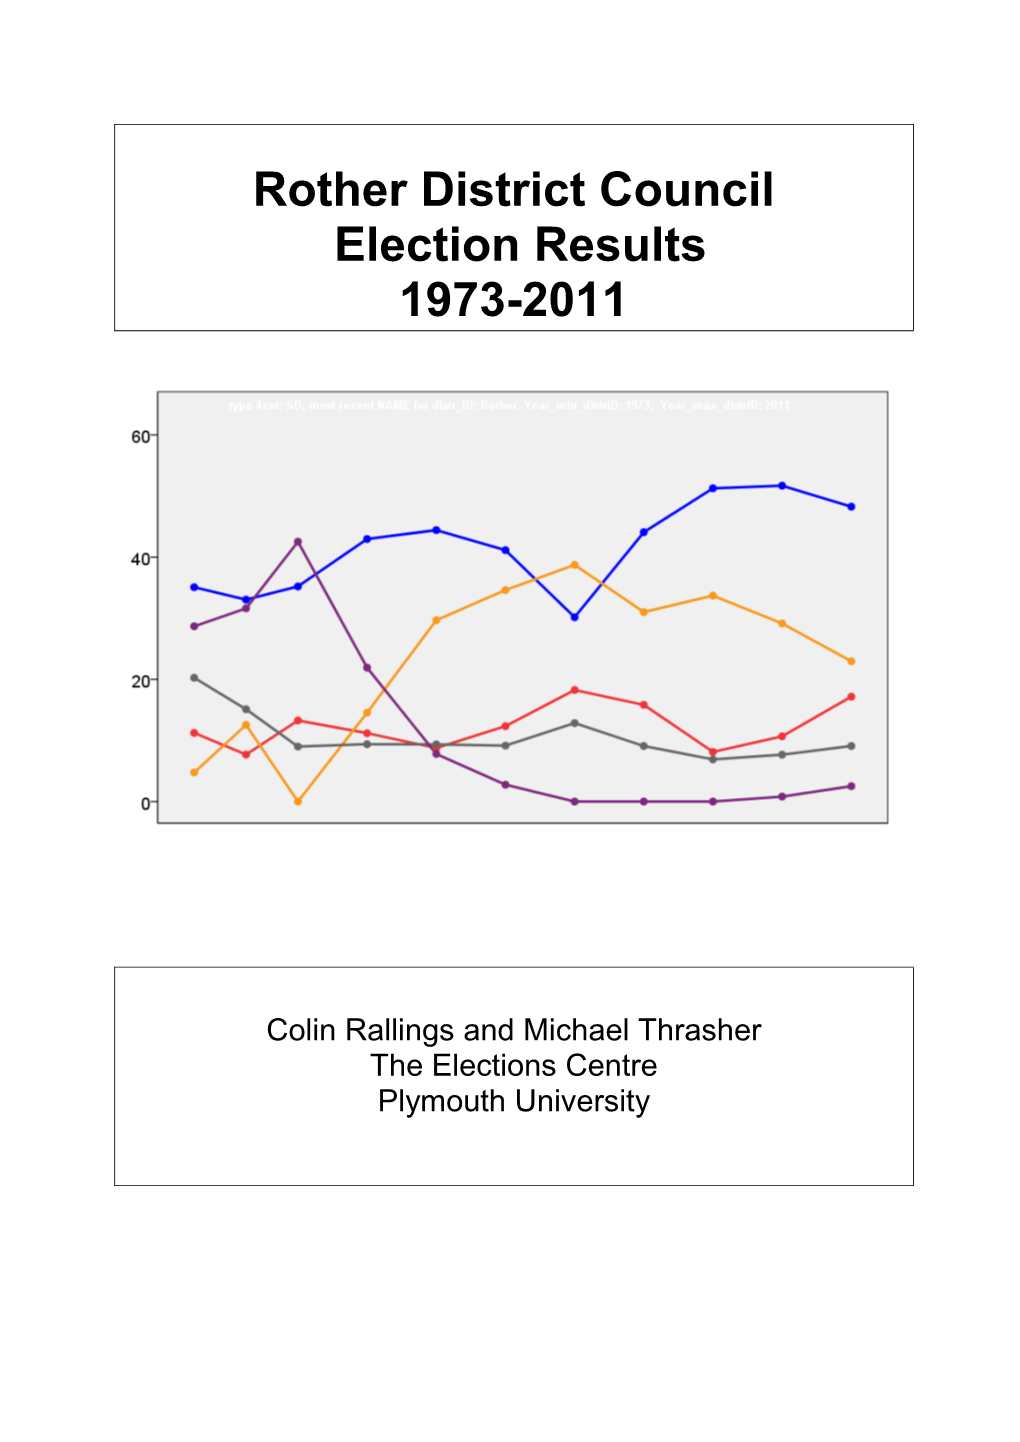 Rother District Council Election Results 1973-2011